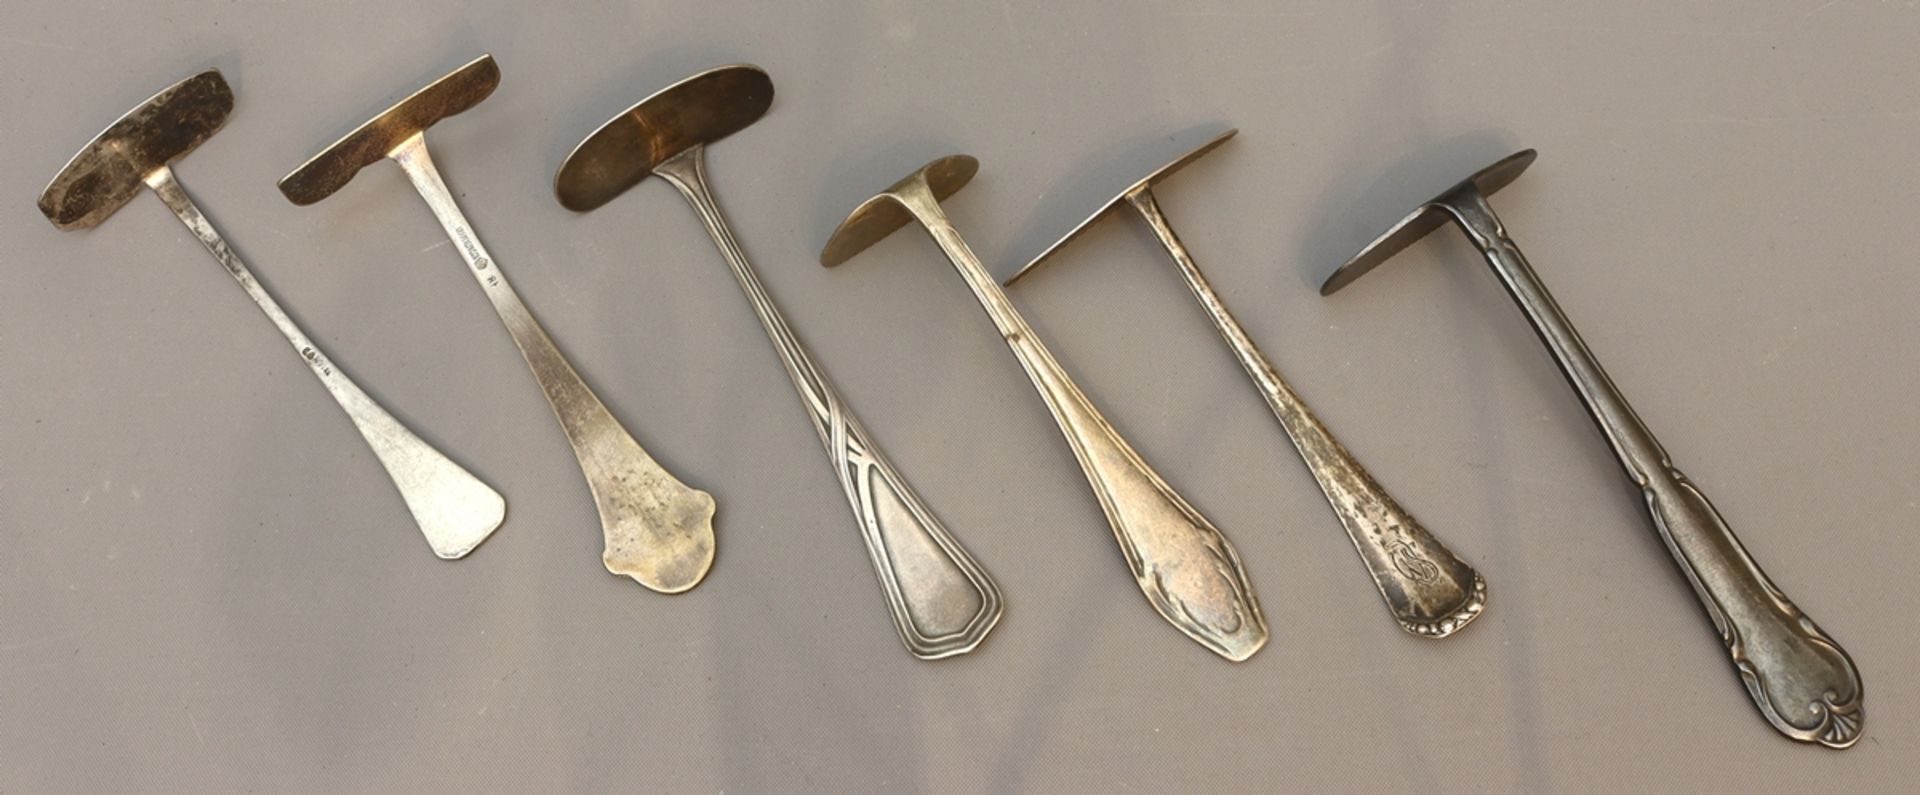 Various children's cutlery, early to mid 20th century, German - Image 5 of 5